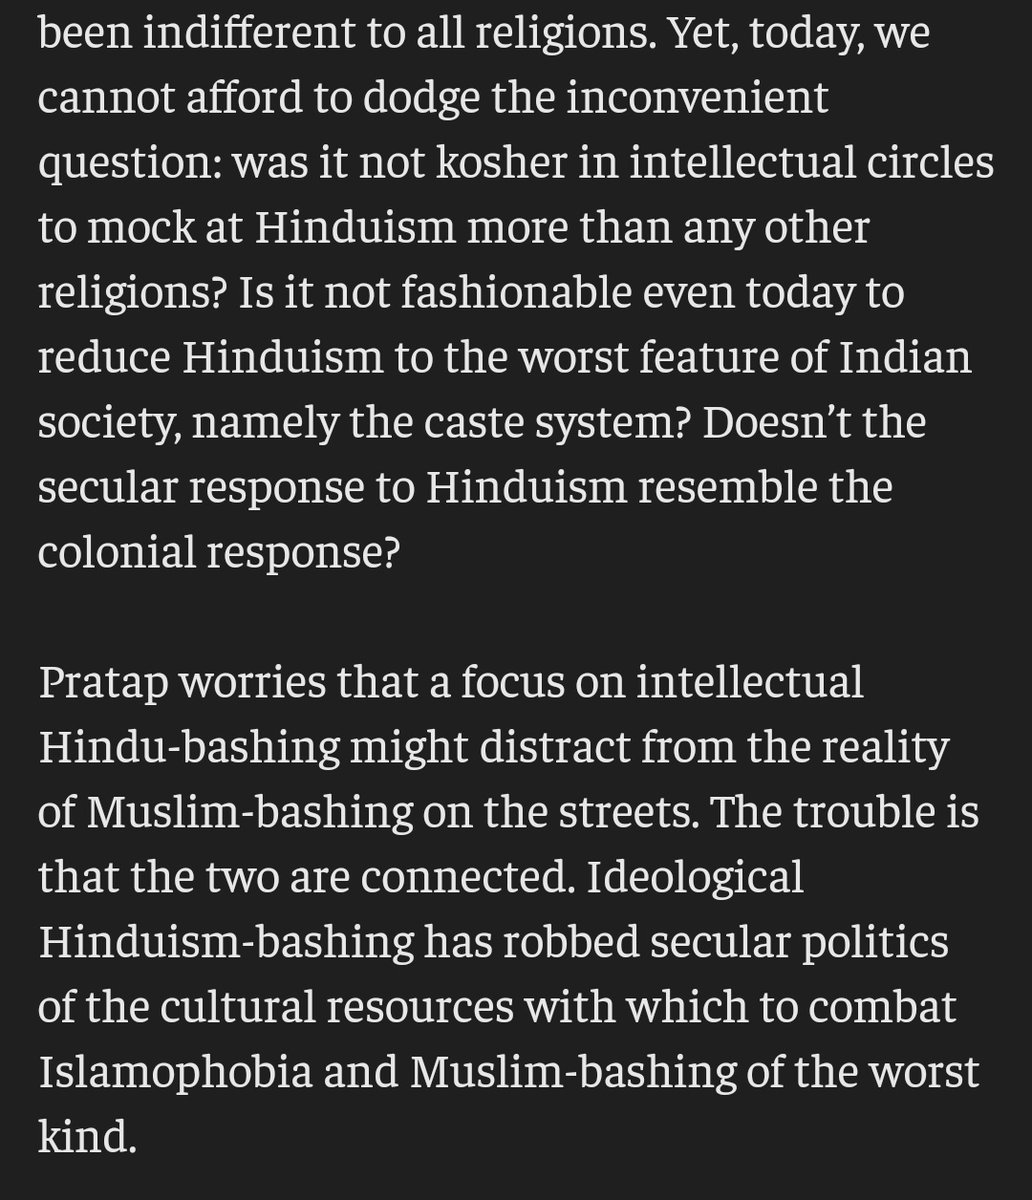 Like here,he acknowledges the absolute colonial gaze that the Left hs inherited in understanding Hinduism that explains the derision which we see e'day. But true to character, in the next paragraph he feels that the H bashing is only ideological and does not play out on streets!